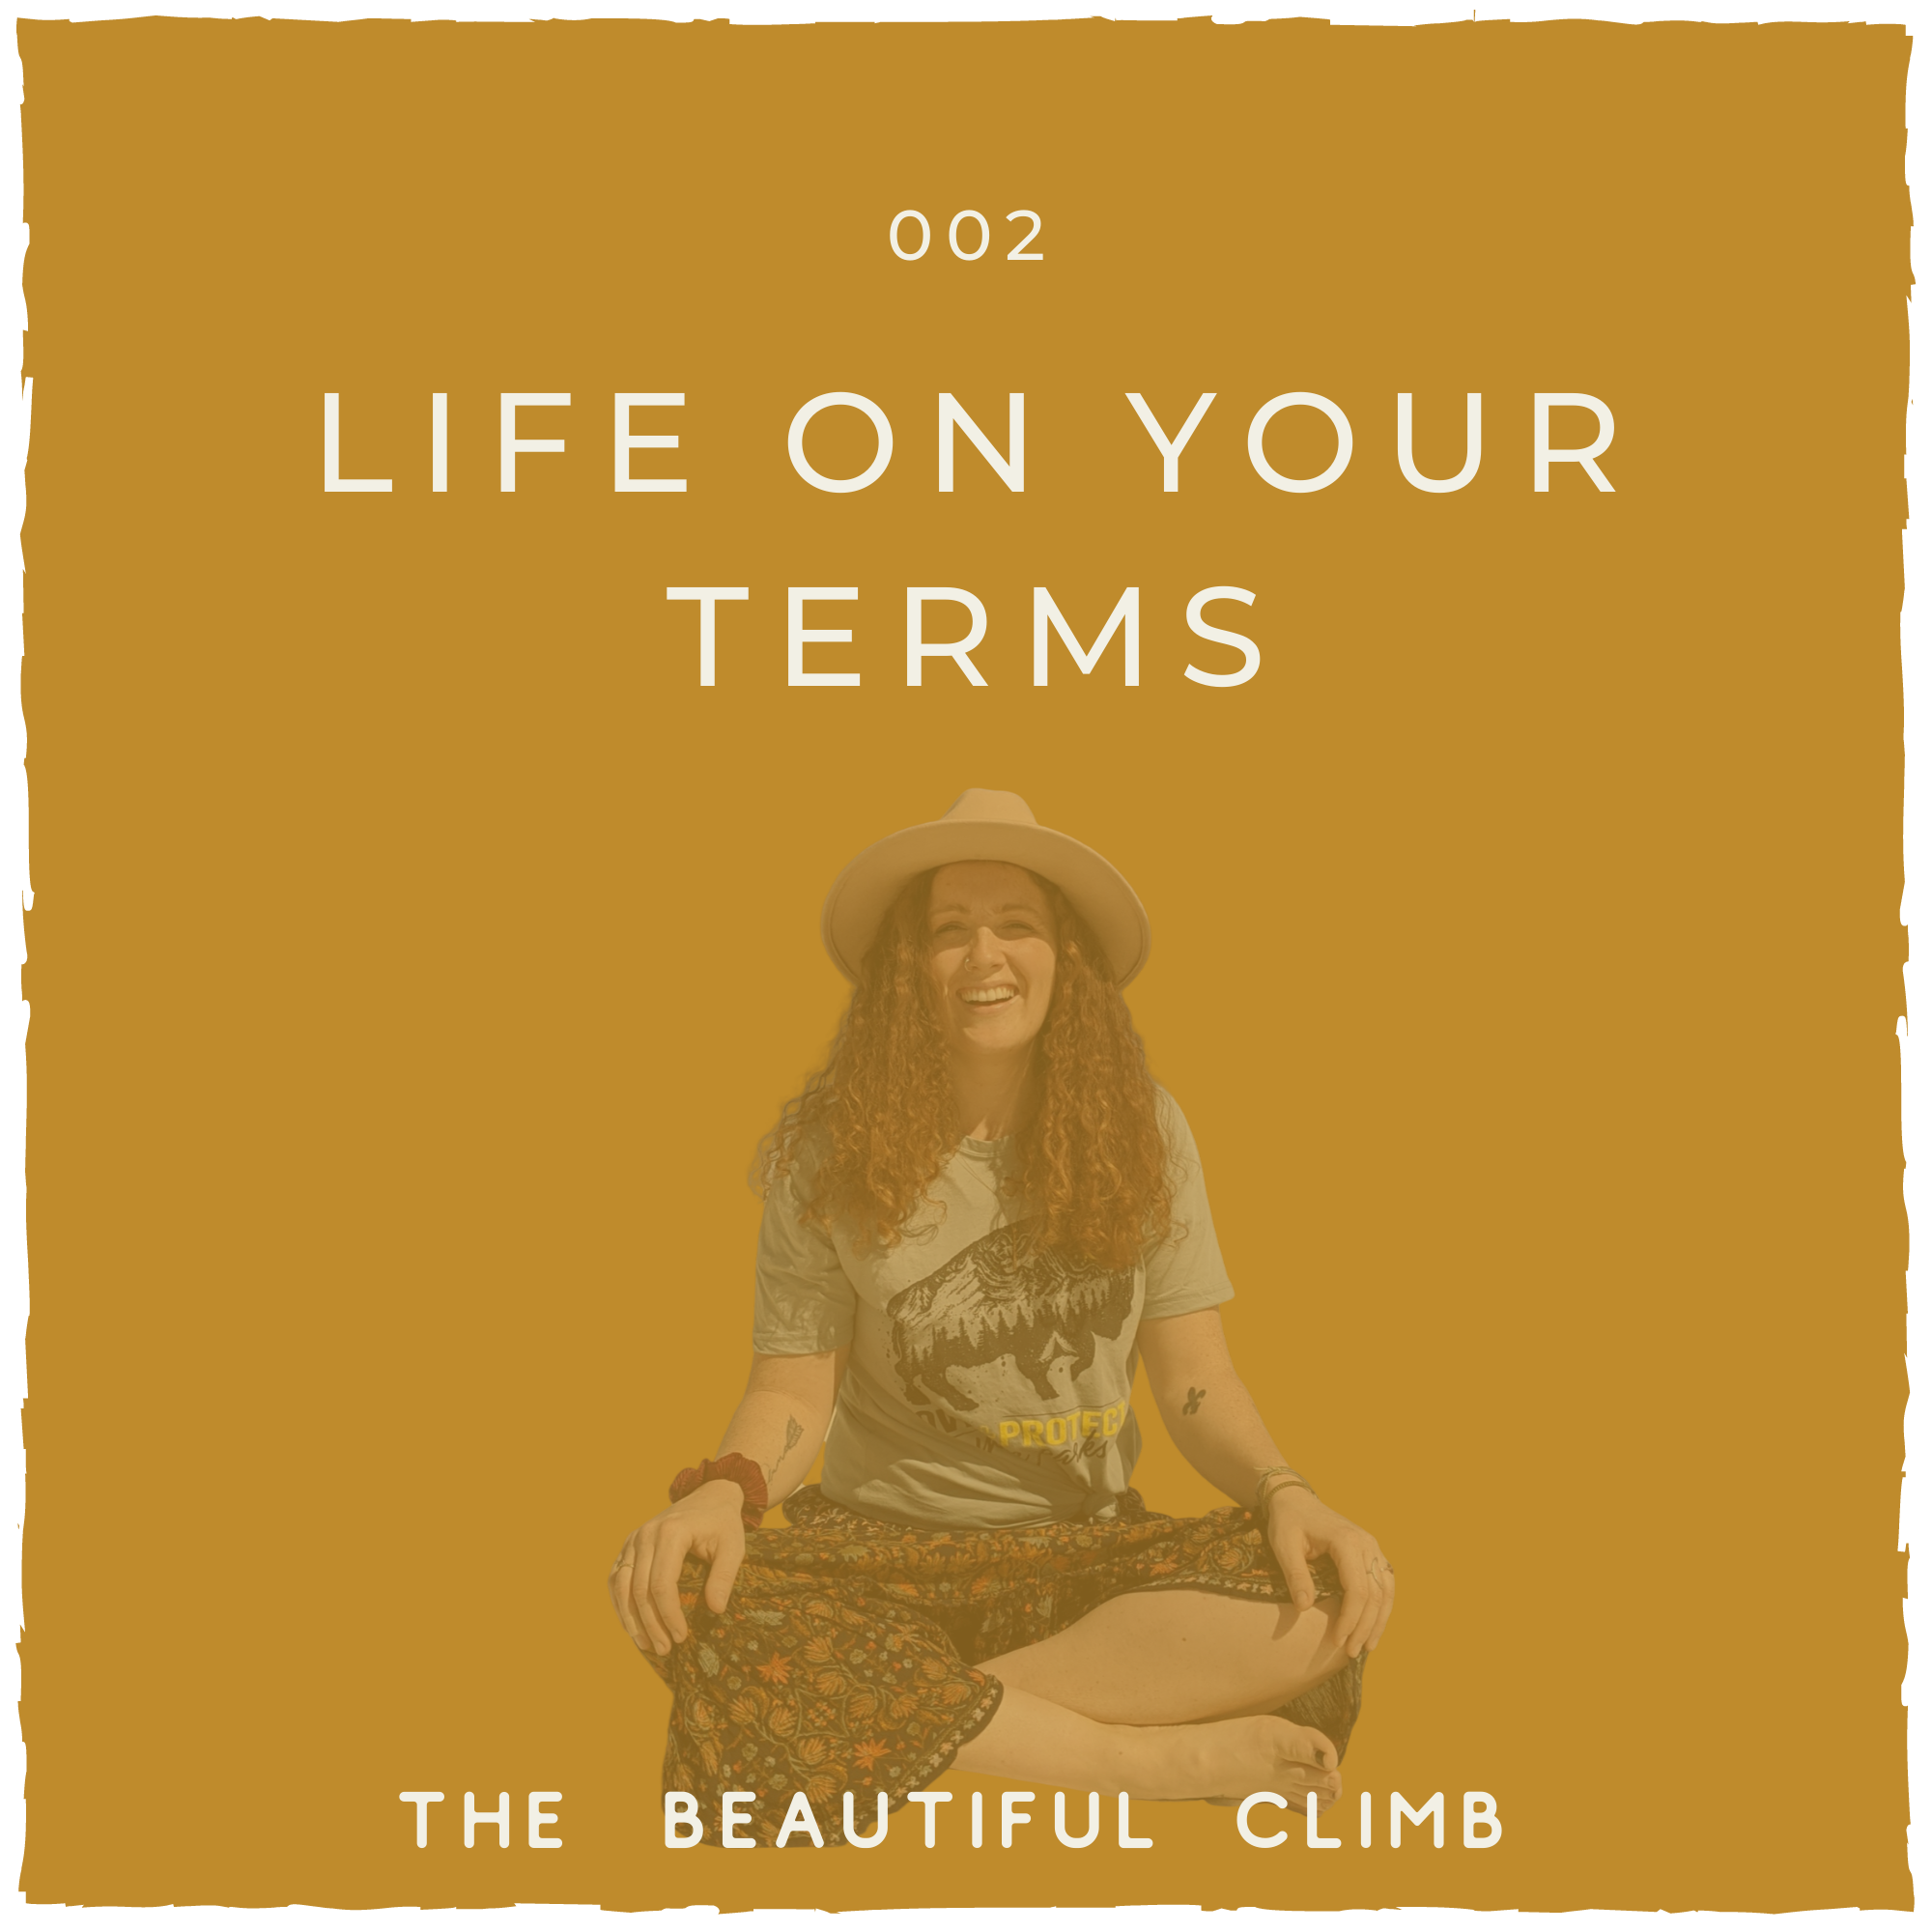 How to live life on your terms | The Beautiful Climb Podcast Episode 2 with Michelle Knight